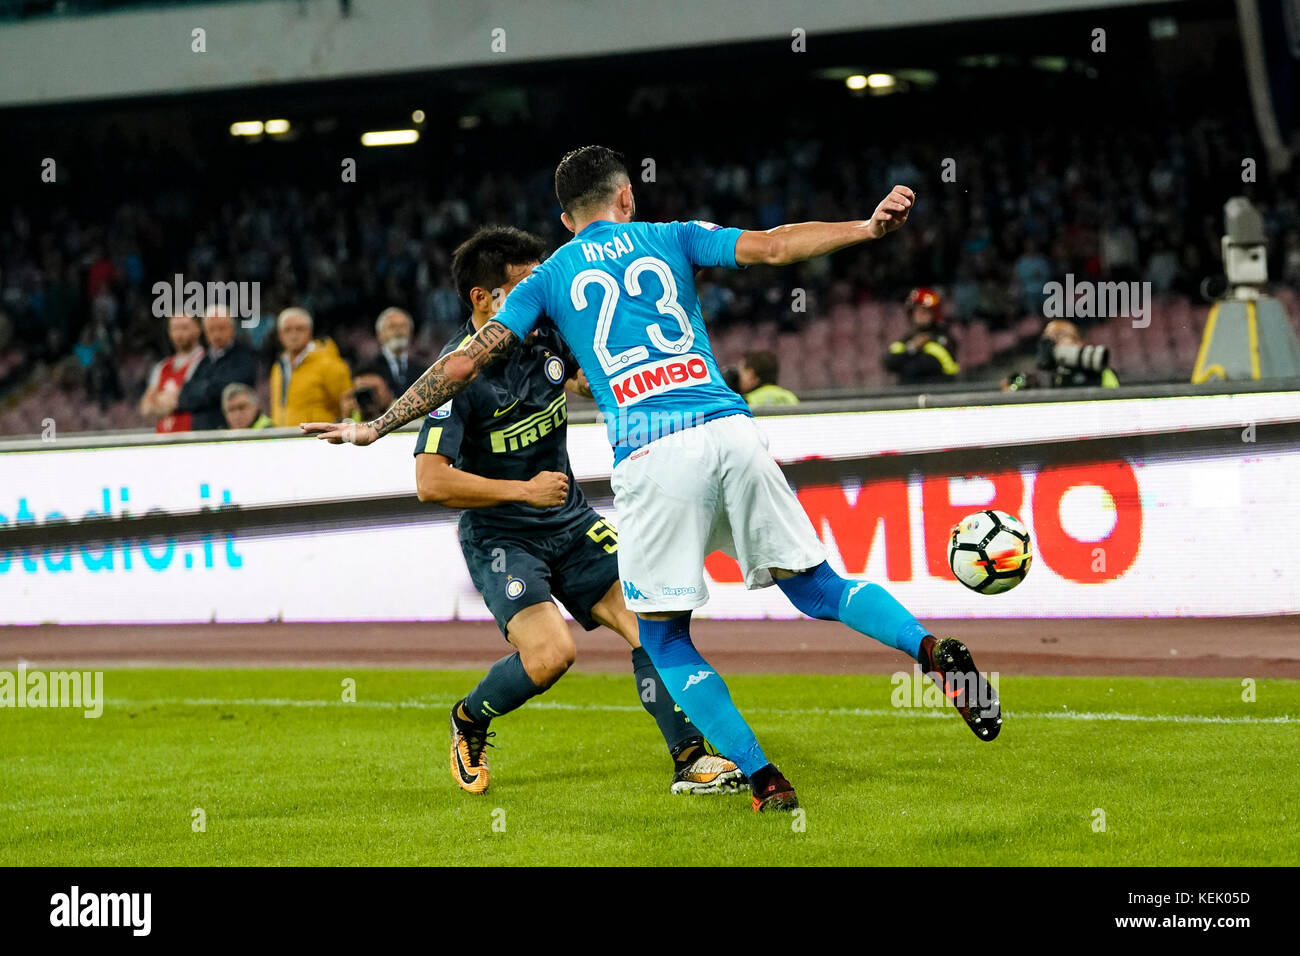 Napoli, Italy. 21st Oct, 2017. Naples - Italy 21/10/2017 ELSEID HYSAJ of S.S.C. NAPOLI and YUTO NAGATOMO of Inter fights for the ball during Serie A match between S.S.C. NAPOLI and Inter at Stadio San Paolo of Naples. Credit: Emanuele Sessa/Pacific Press/Alamy Live News Stock Photo